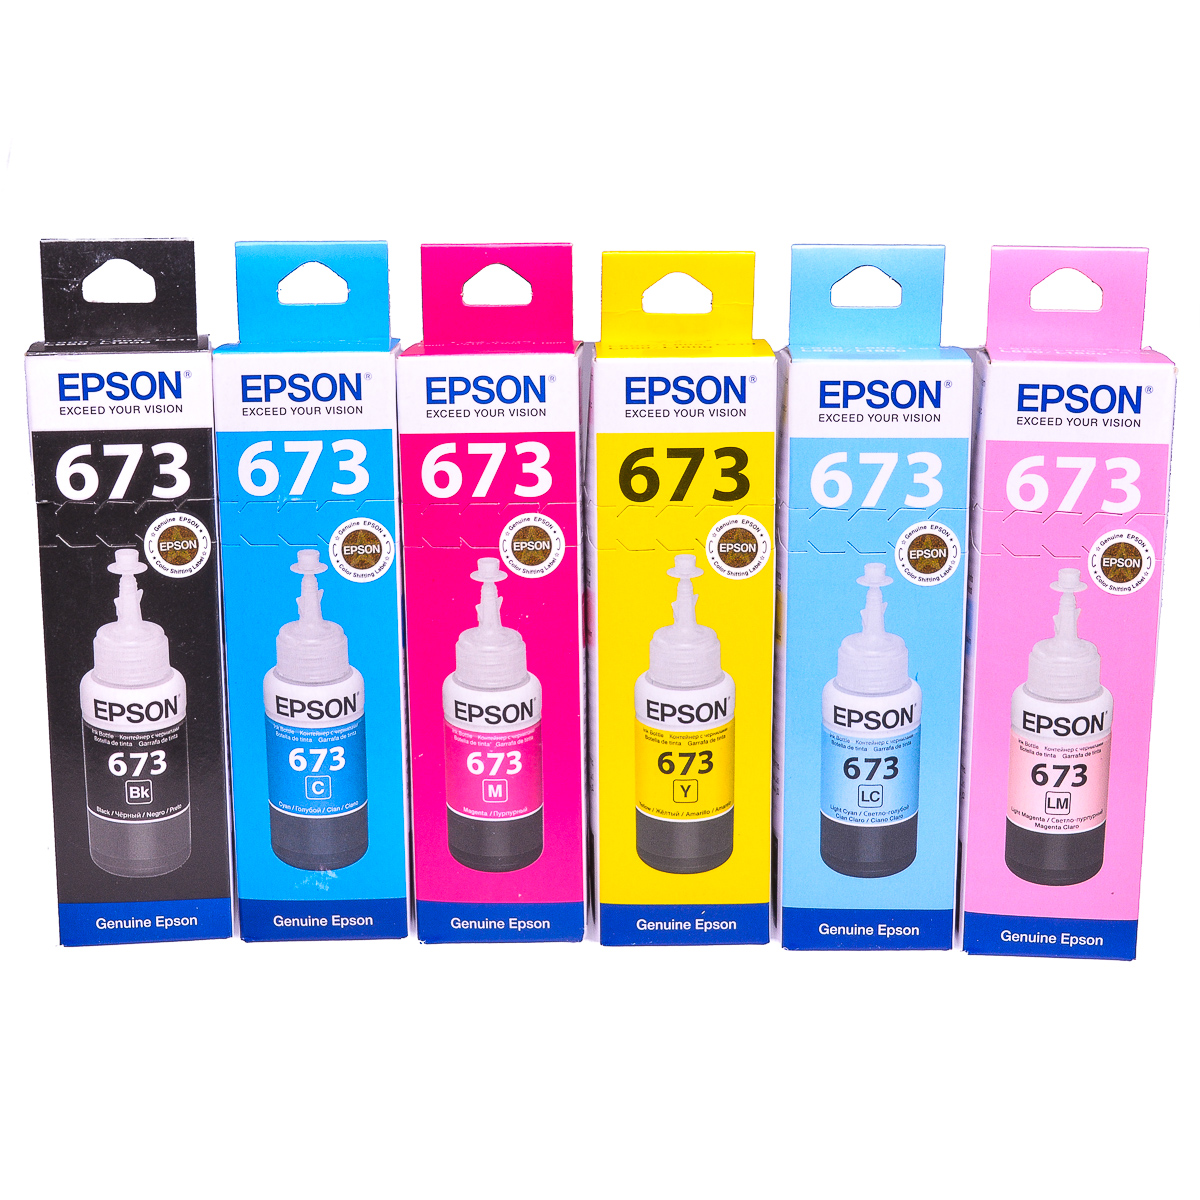 Genuine Multipack ink refill for use with Epson L850 printer